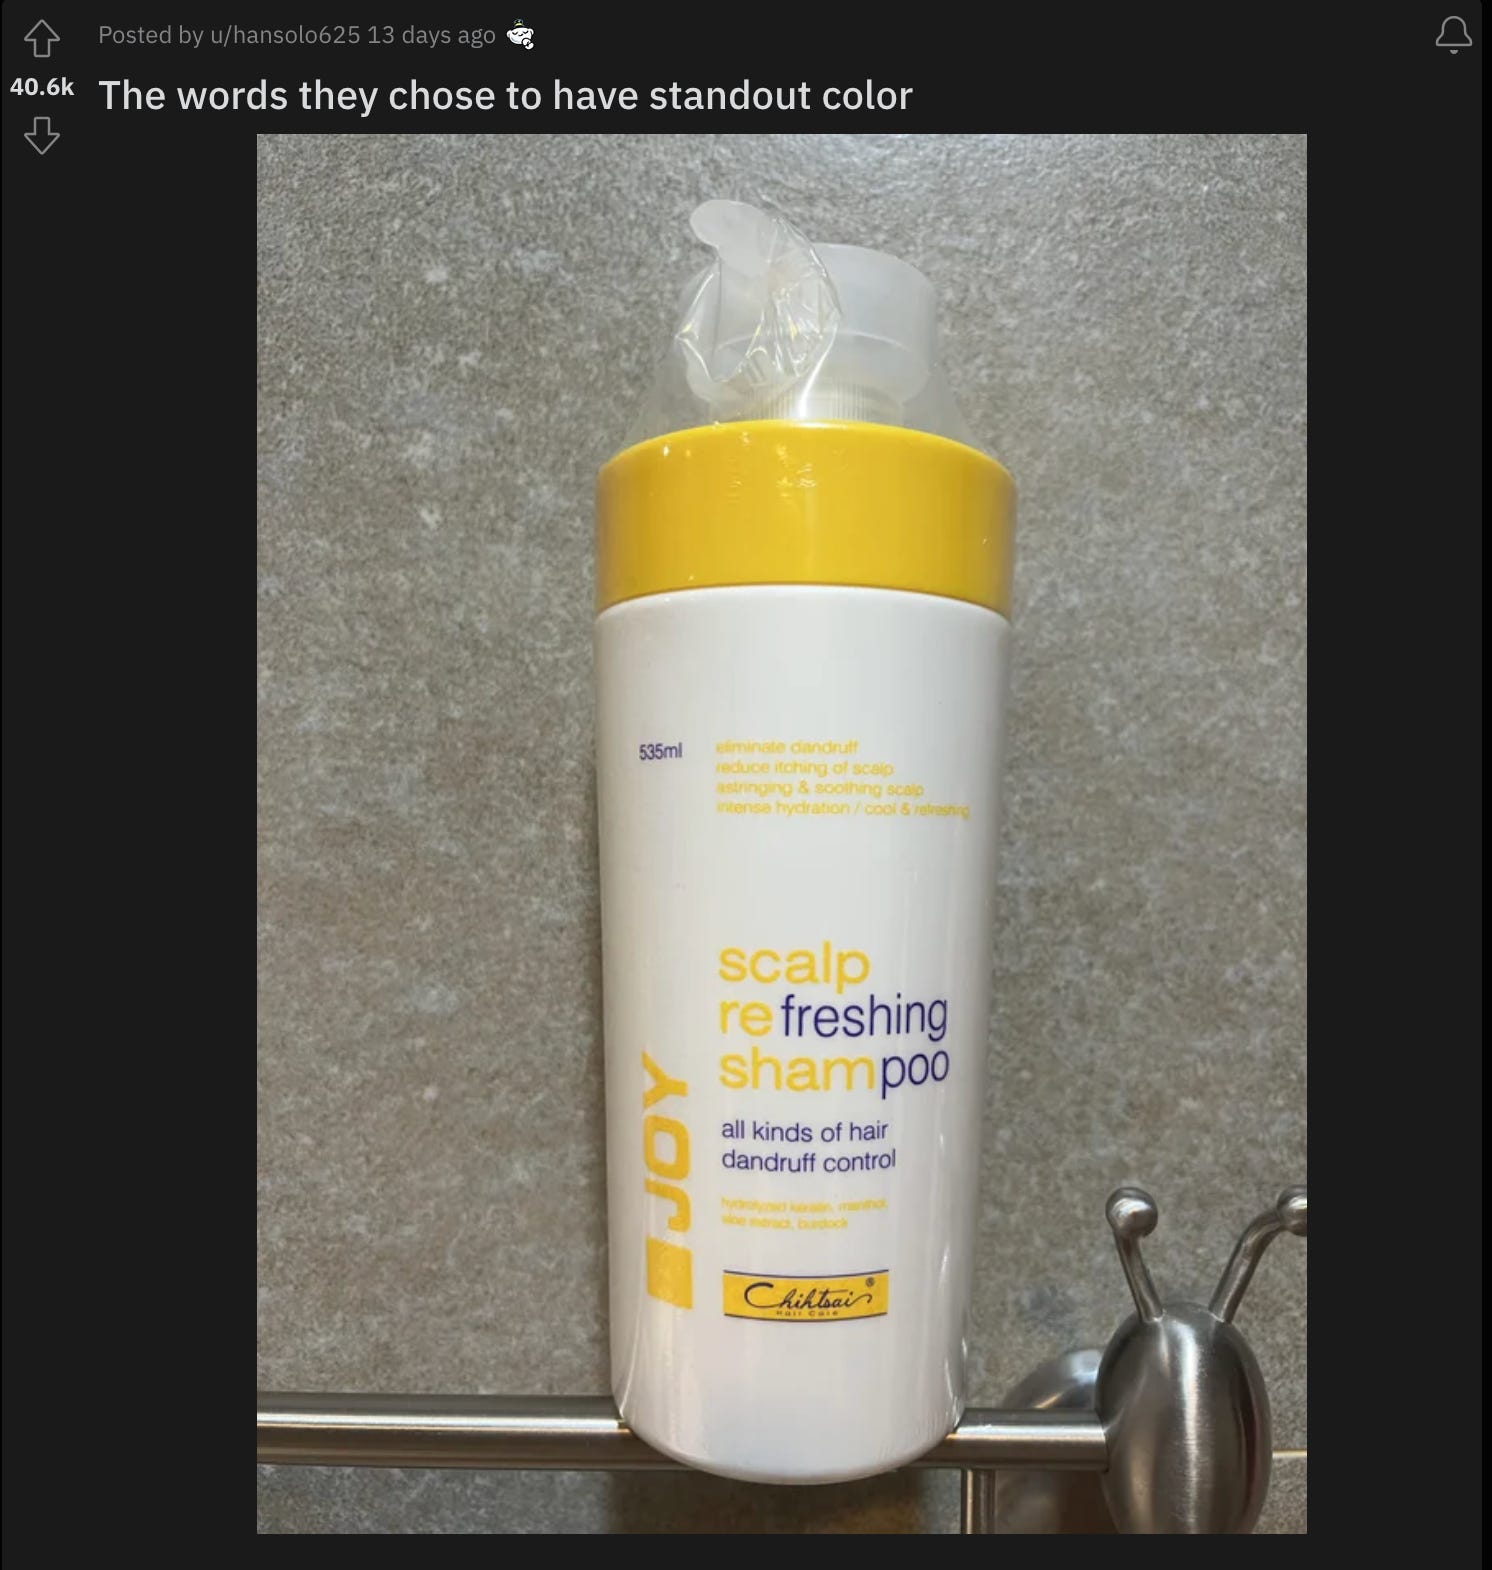 Screenshot of a Reddit post captioned "The words they chose to have a standout color". The post includes a photo of a shampoo bottle labeled "scalp refreshing shampoo" but "freshing" and "poo" are highlighted in a different color.